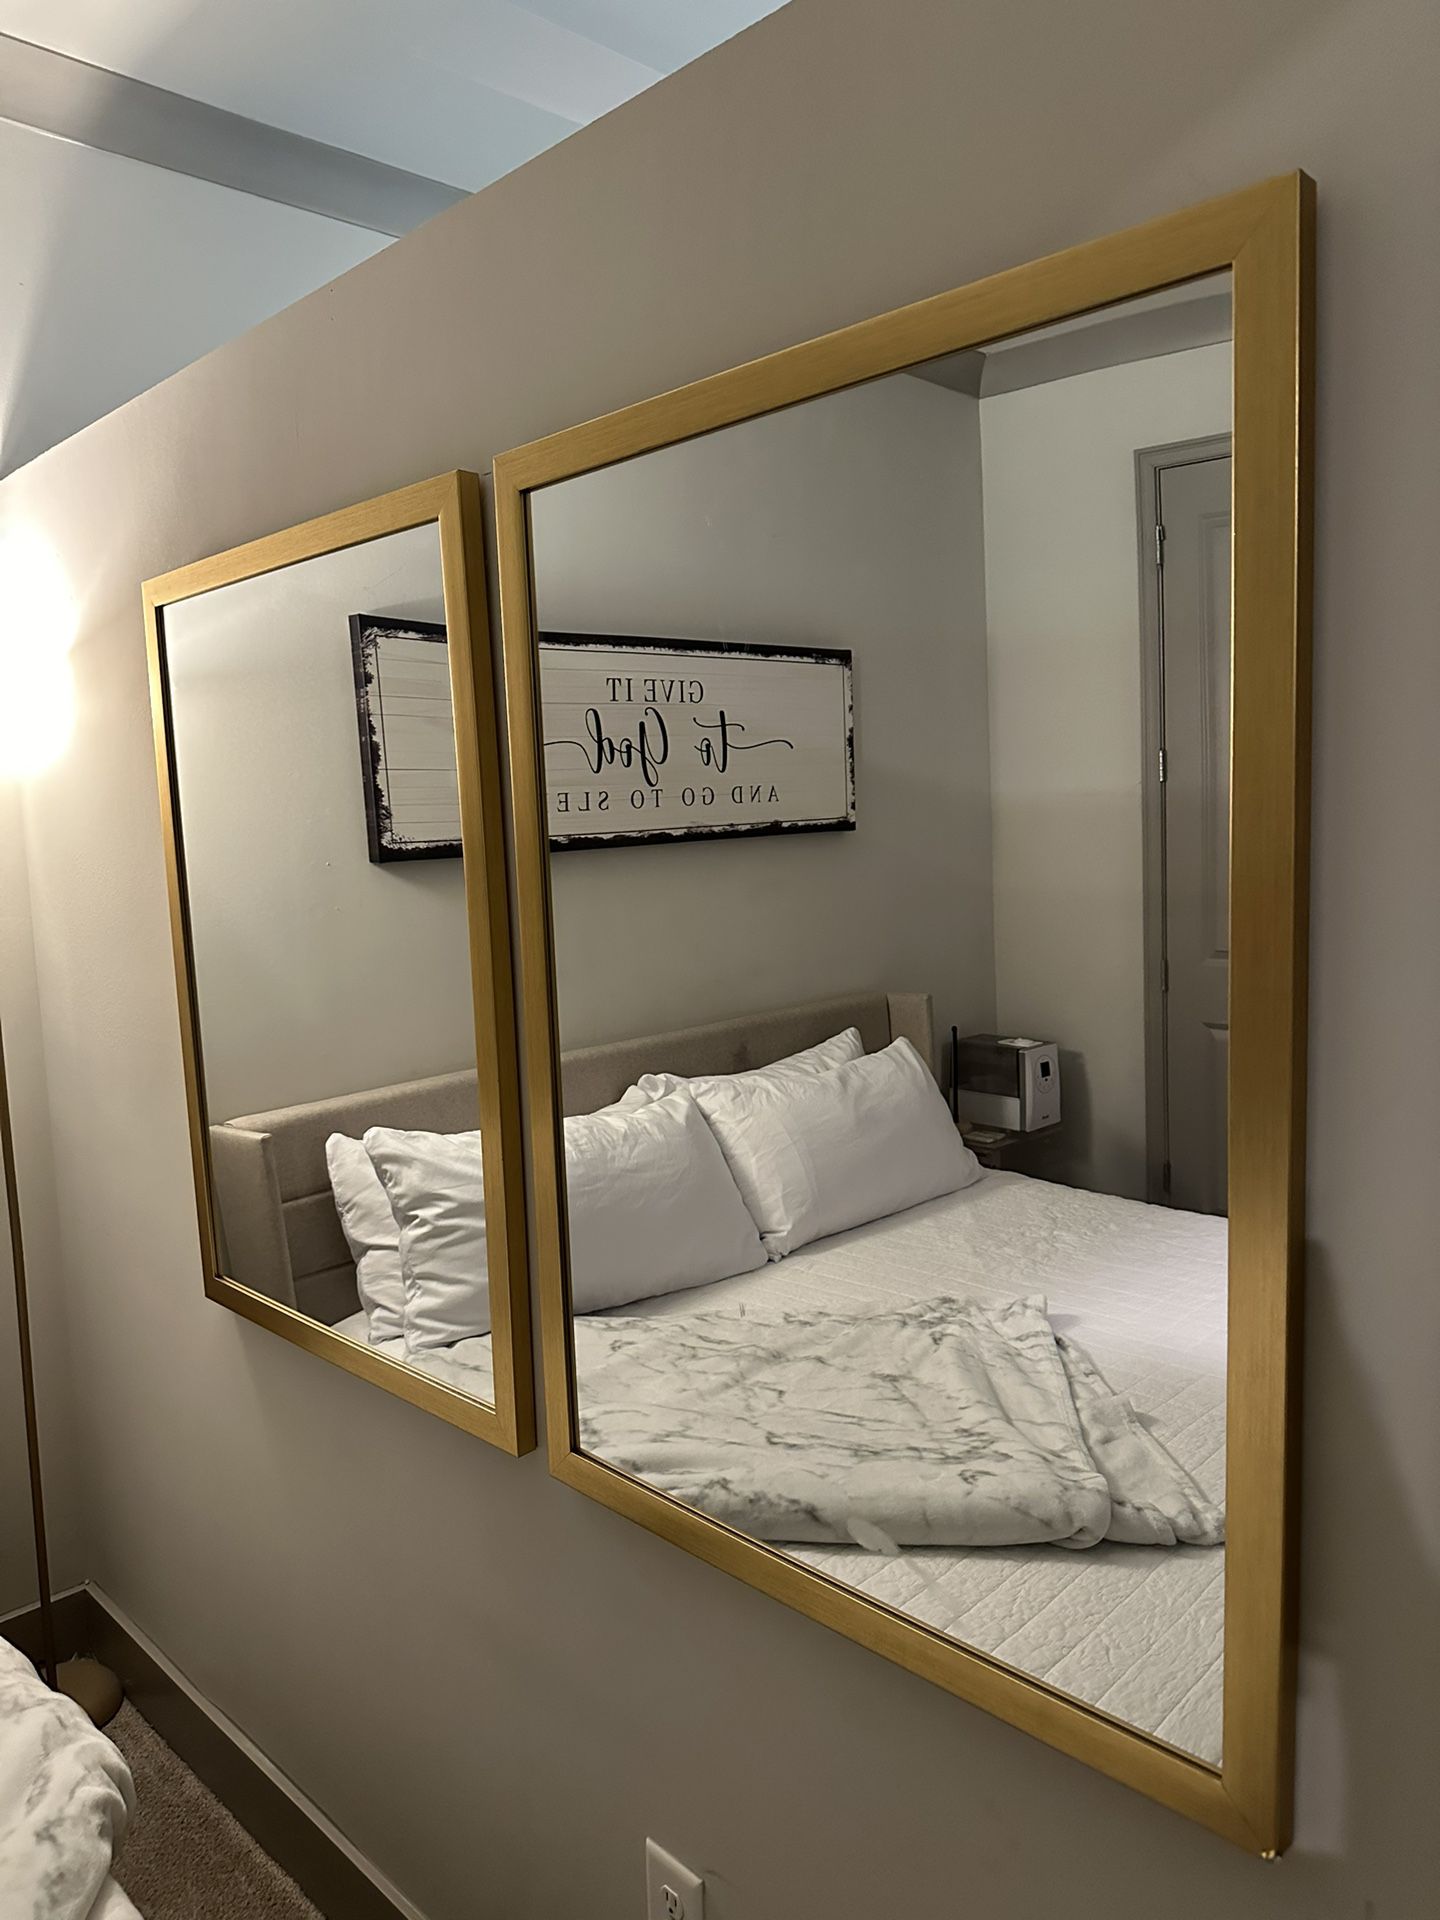 Two 24” X 36” Gold Framed Wall Mirrors